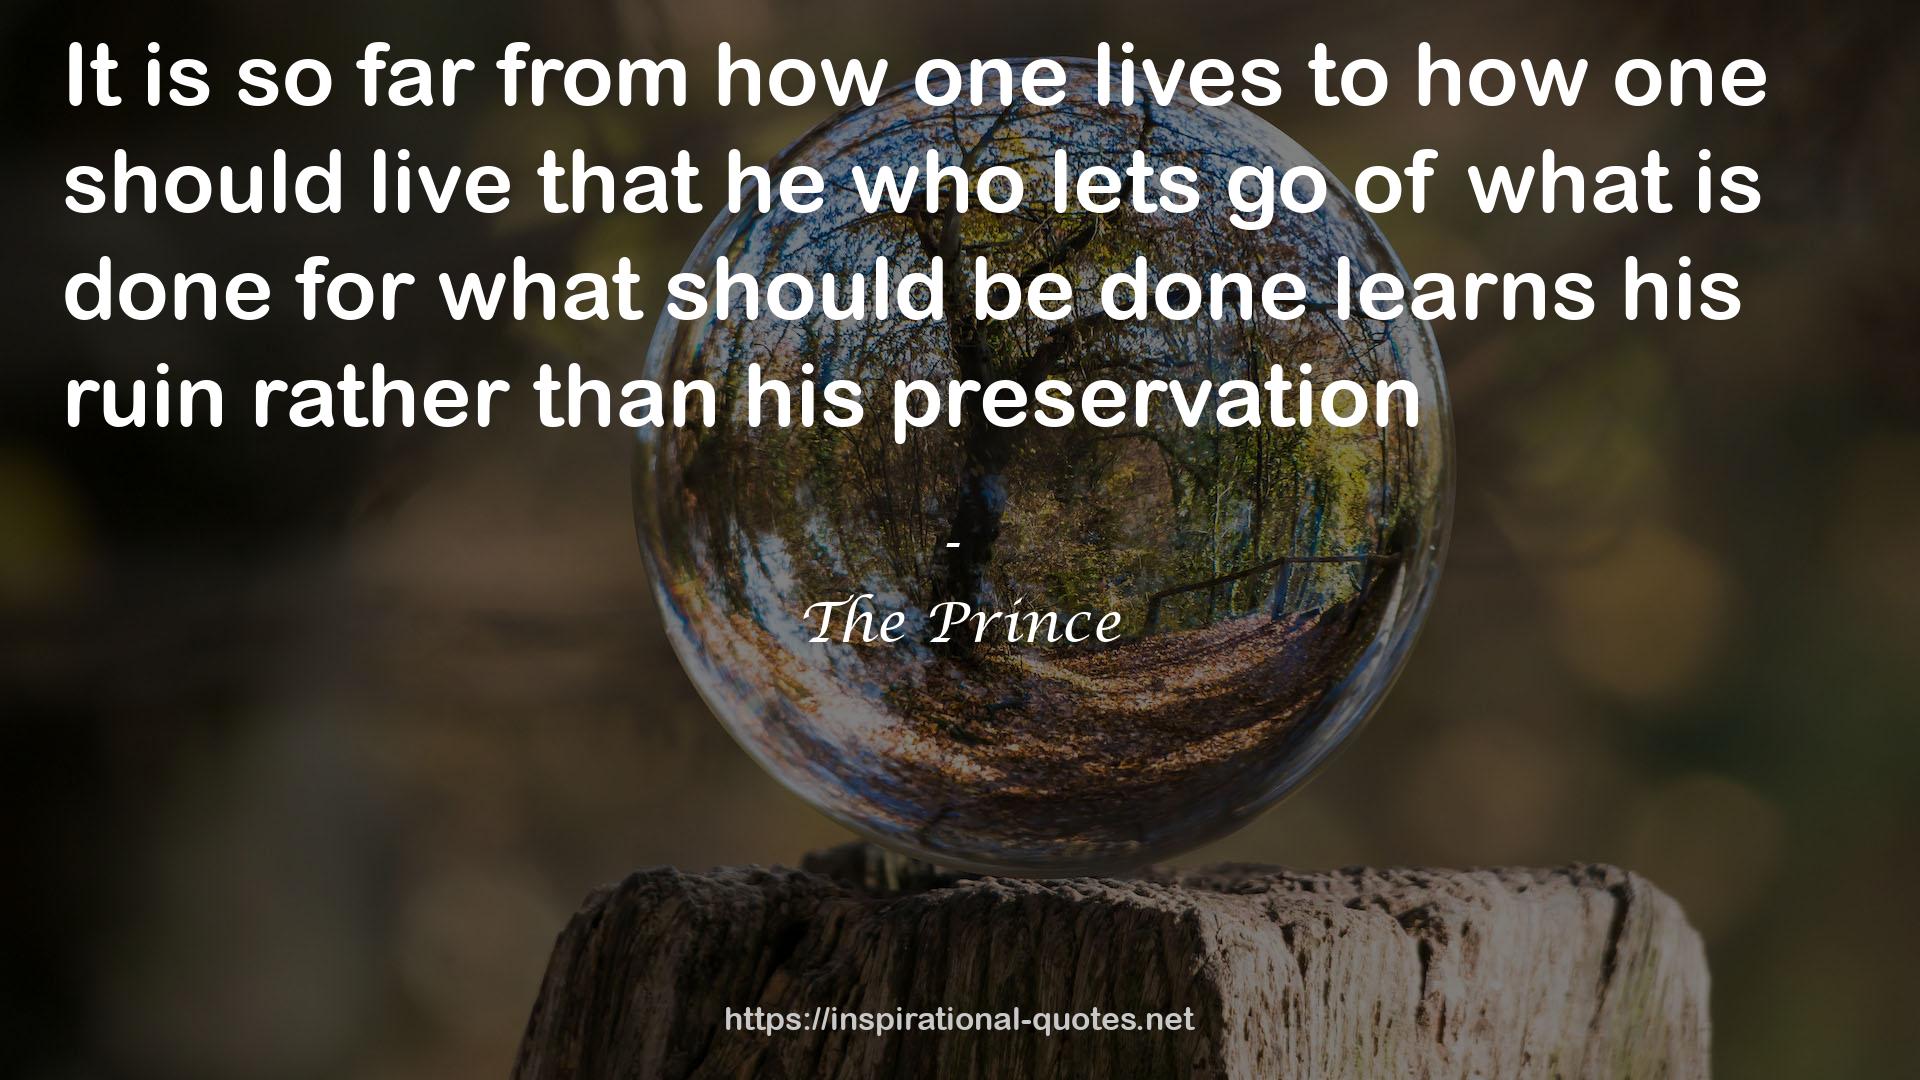 The Prince QUOTES